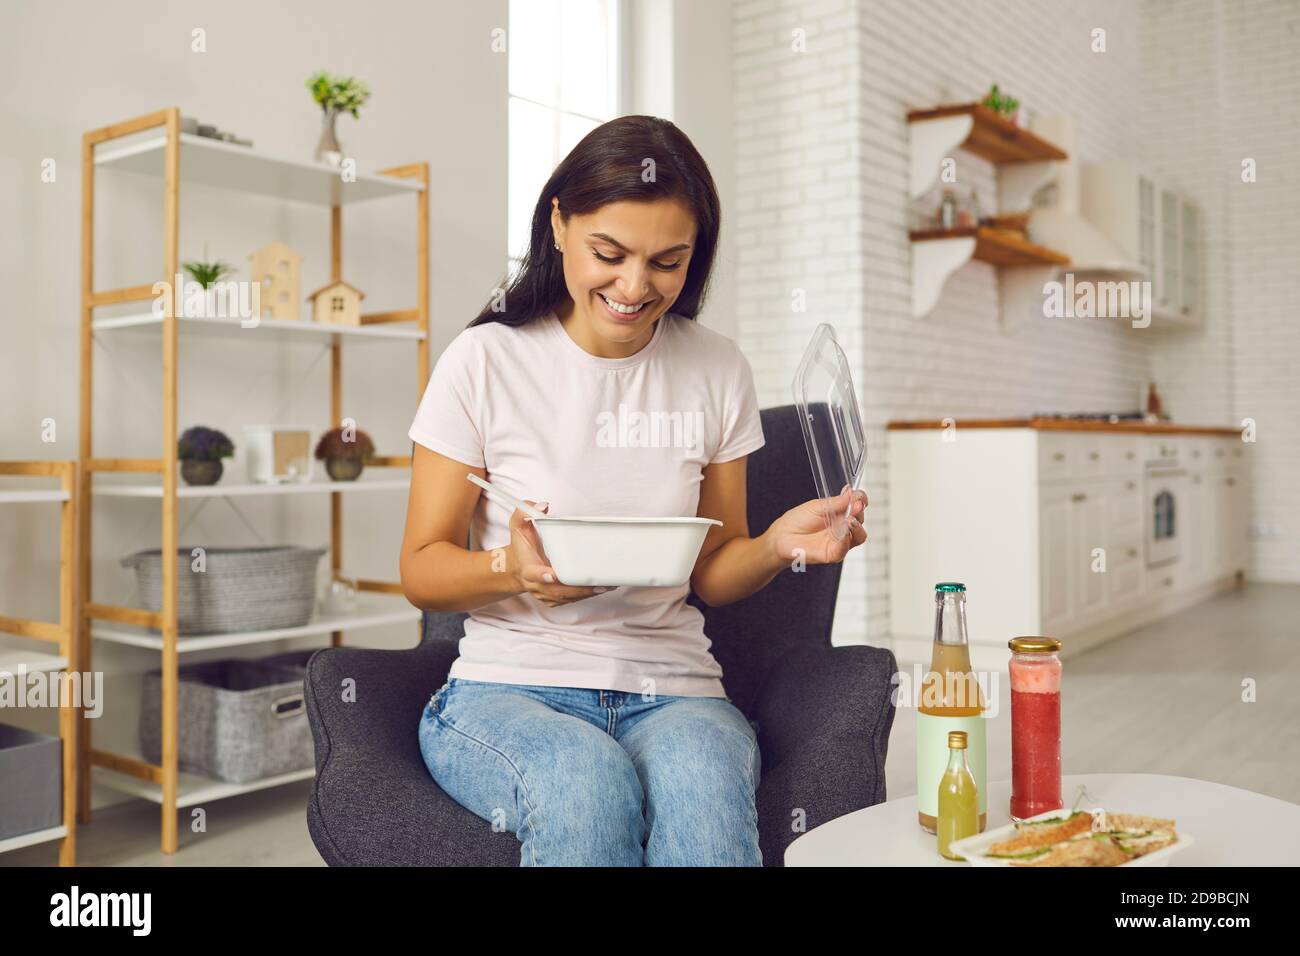 Happy woman sitting at home on and eating takeaway food from containers during lunch break. Stock Photo